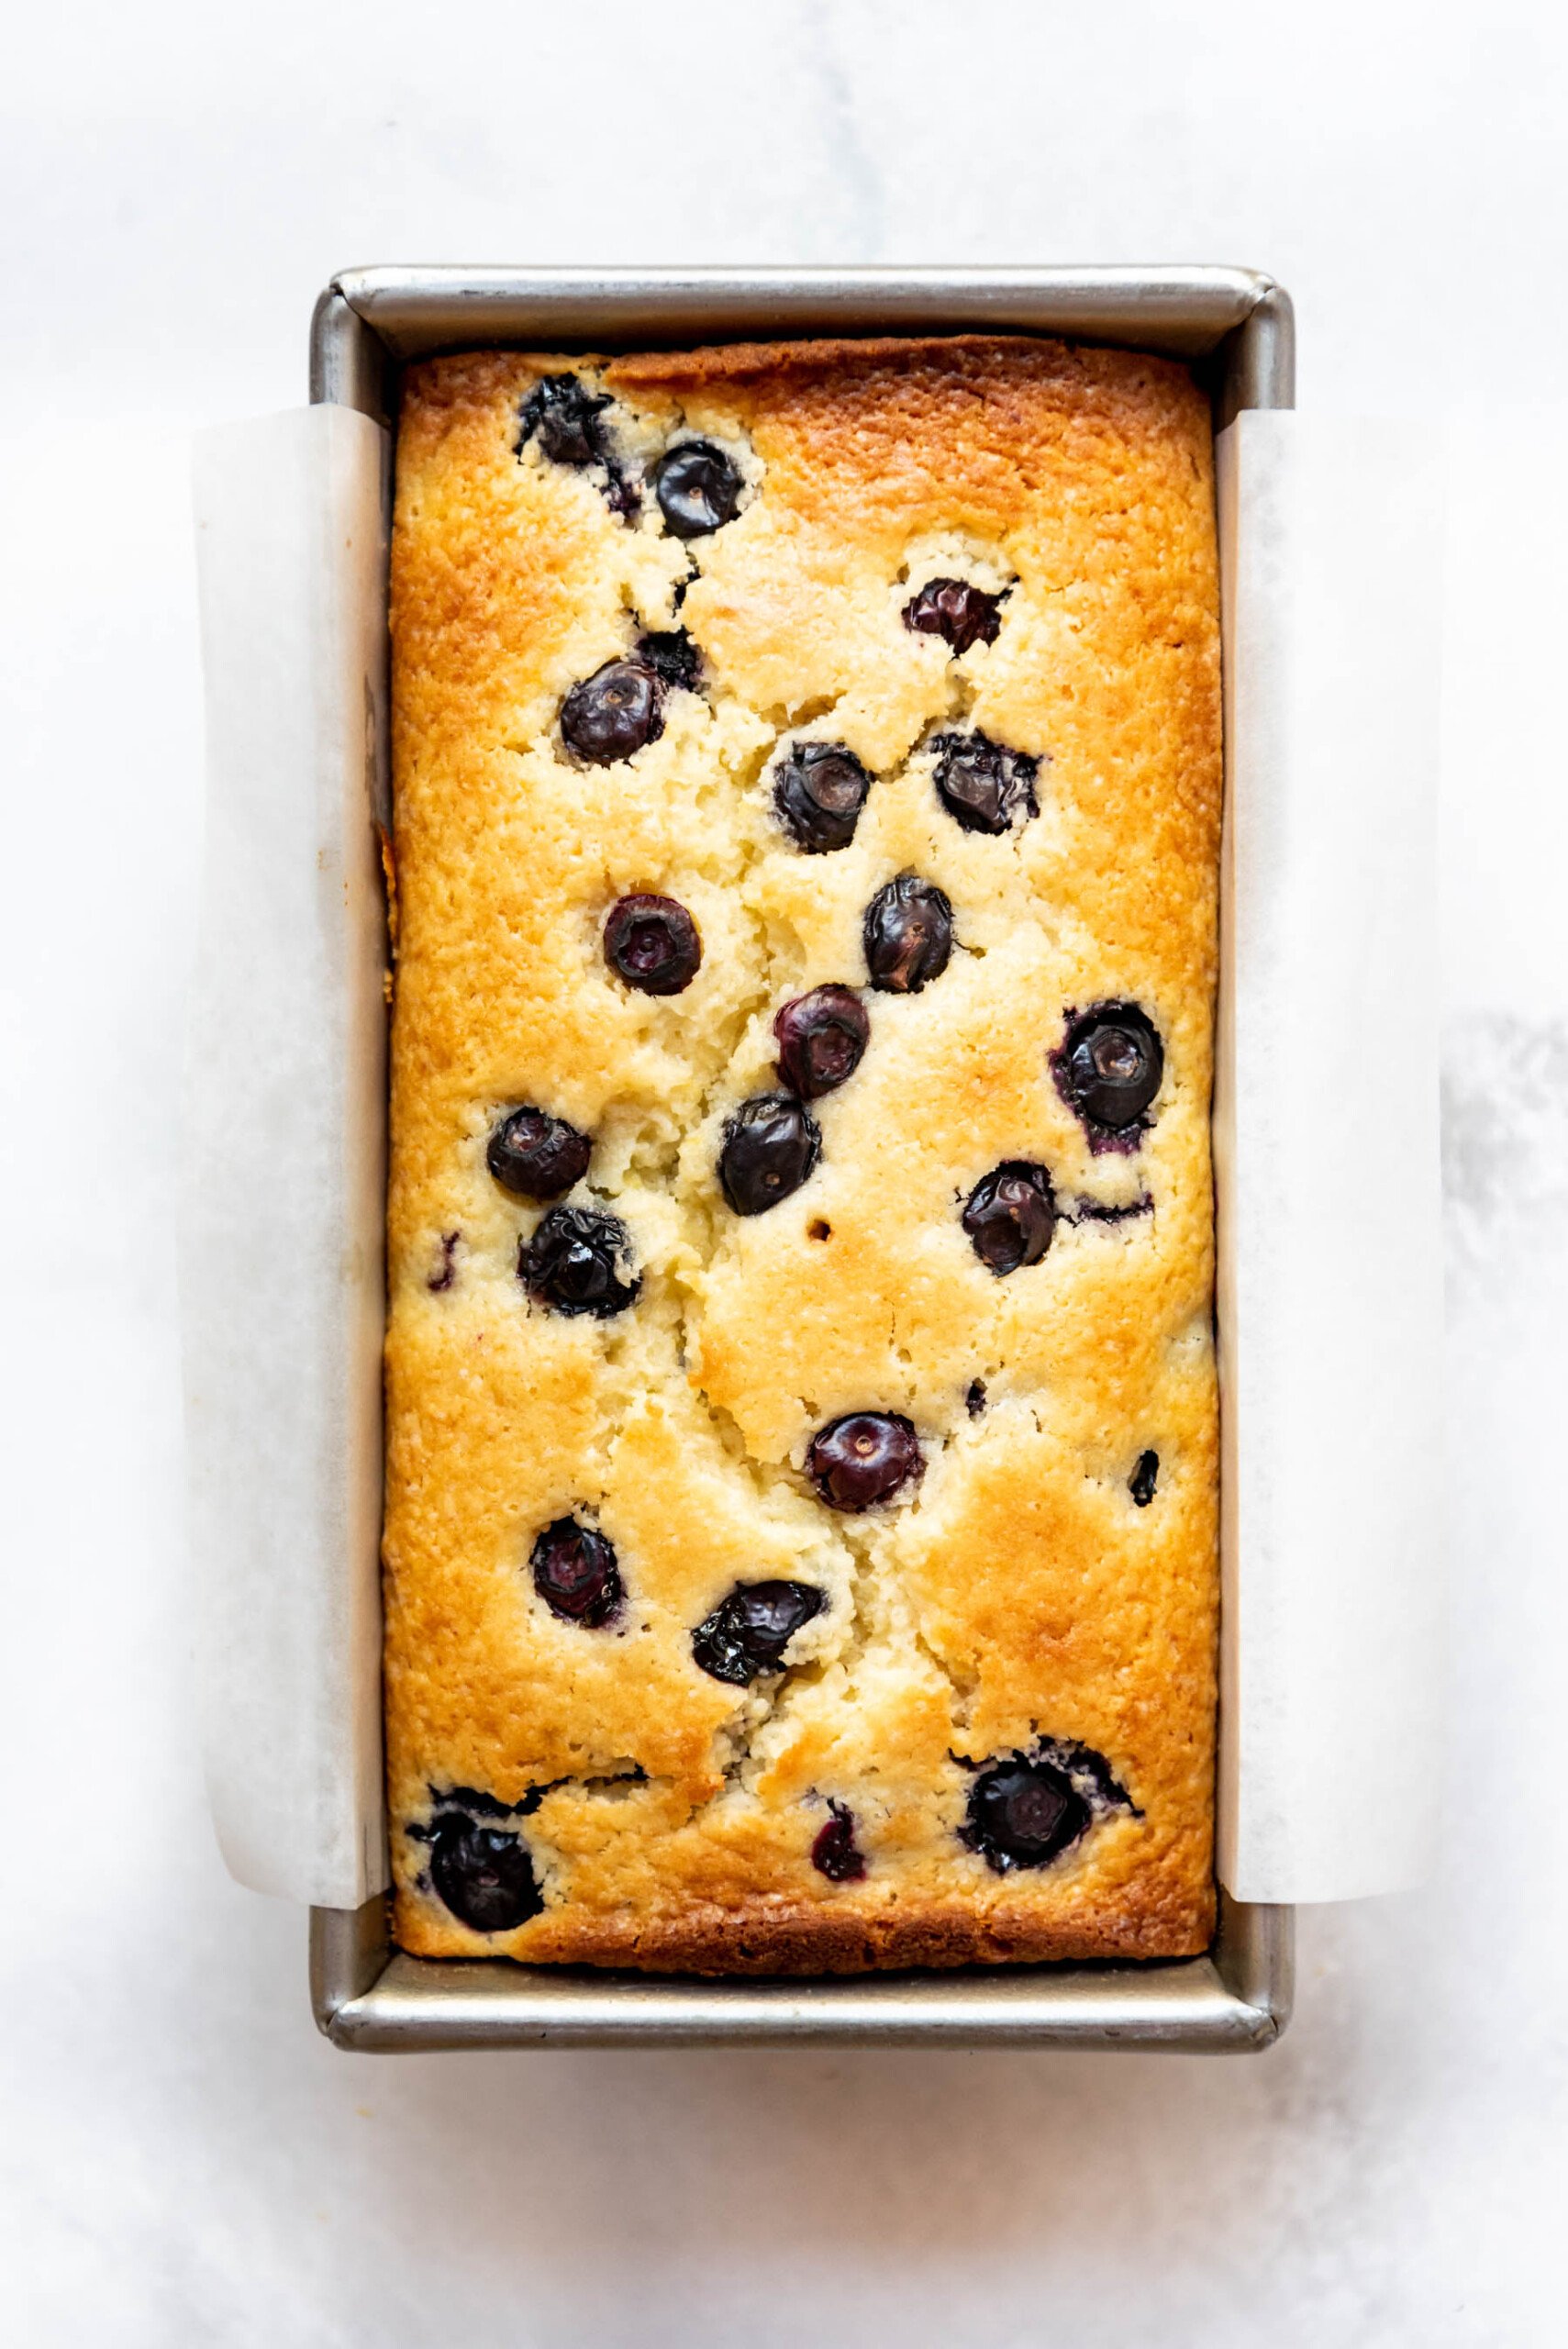 Lemon blueberry quick bread baked in a loaf pan.